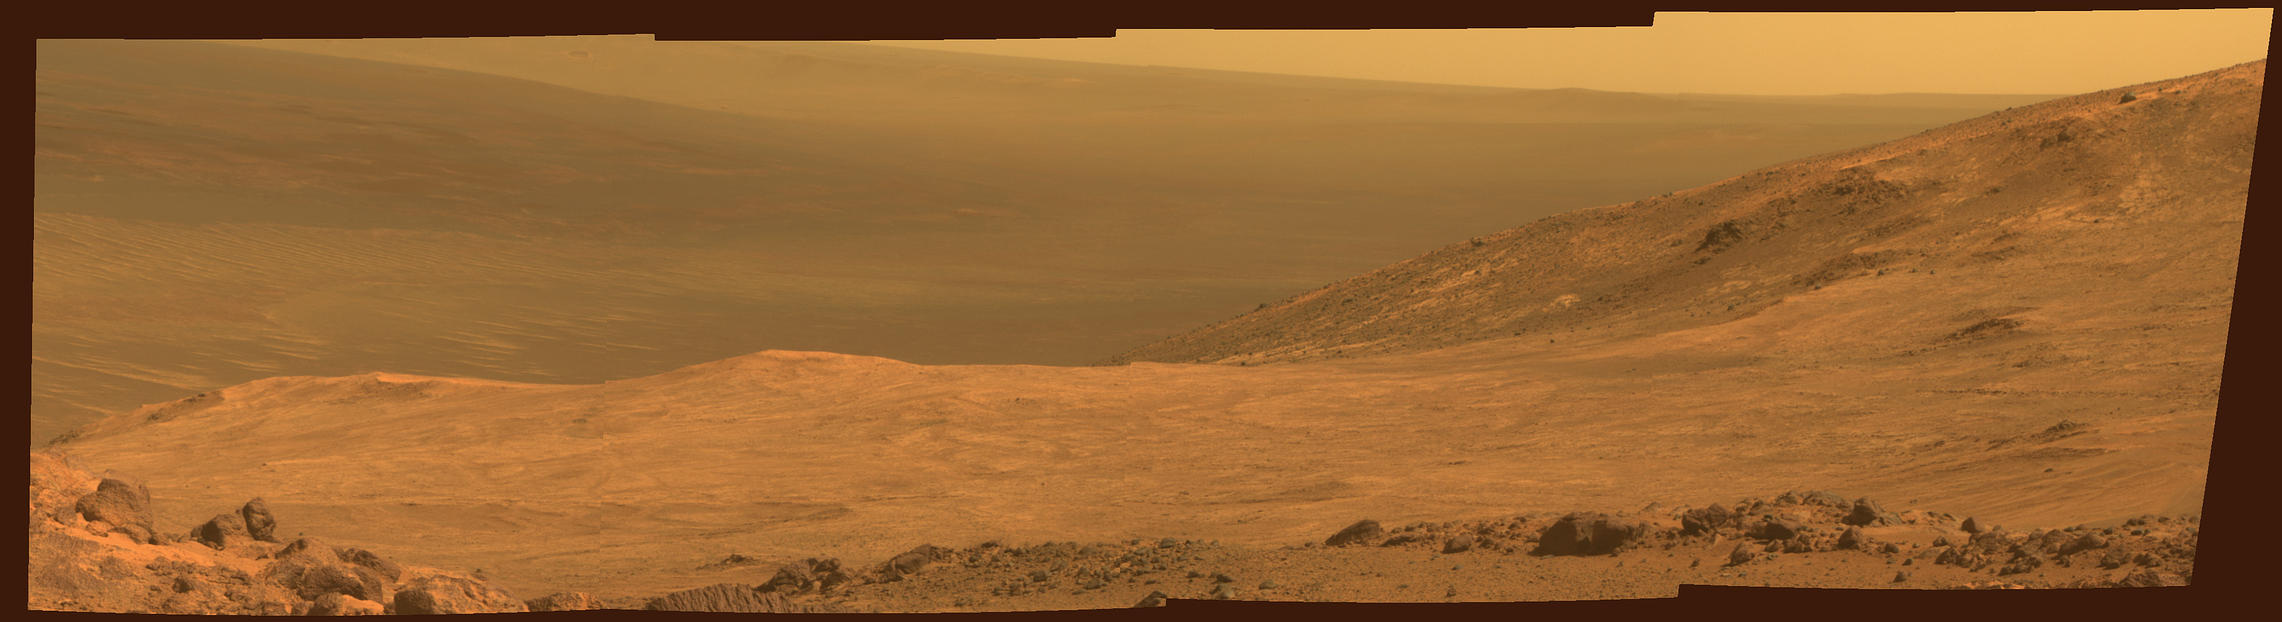 This view from NASA's Opportunity Mars rover shows part of "Marathon Valley," a destination on the western rim of Endeavour Crater, as seen from an overlook north of the valley. It was taken by the rover's Pancam on March 13, 2015. This version is in approximate true color.